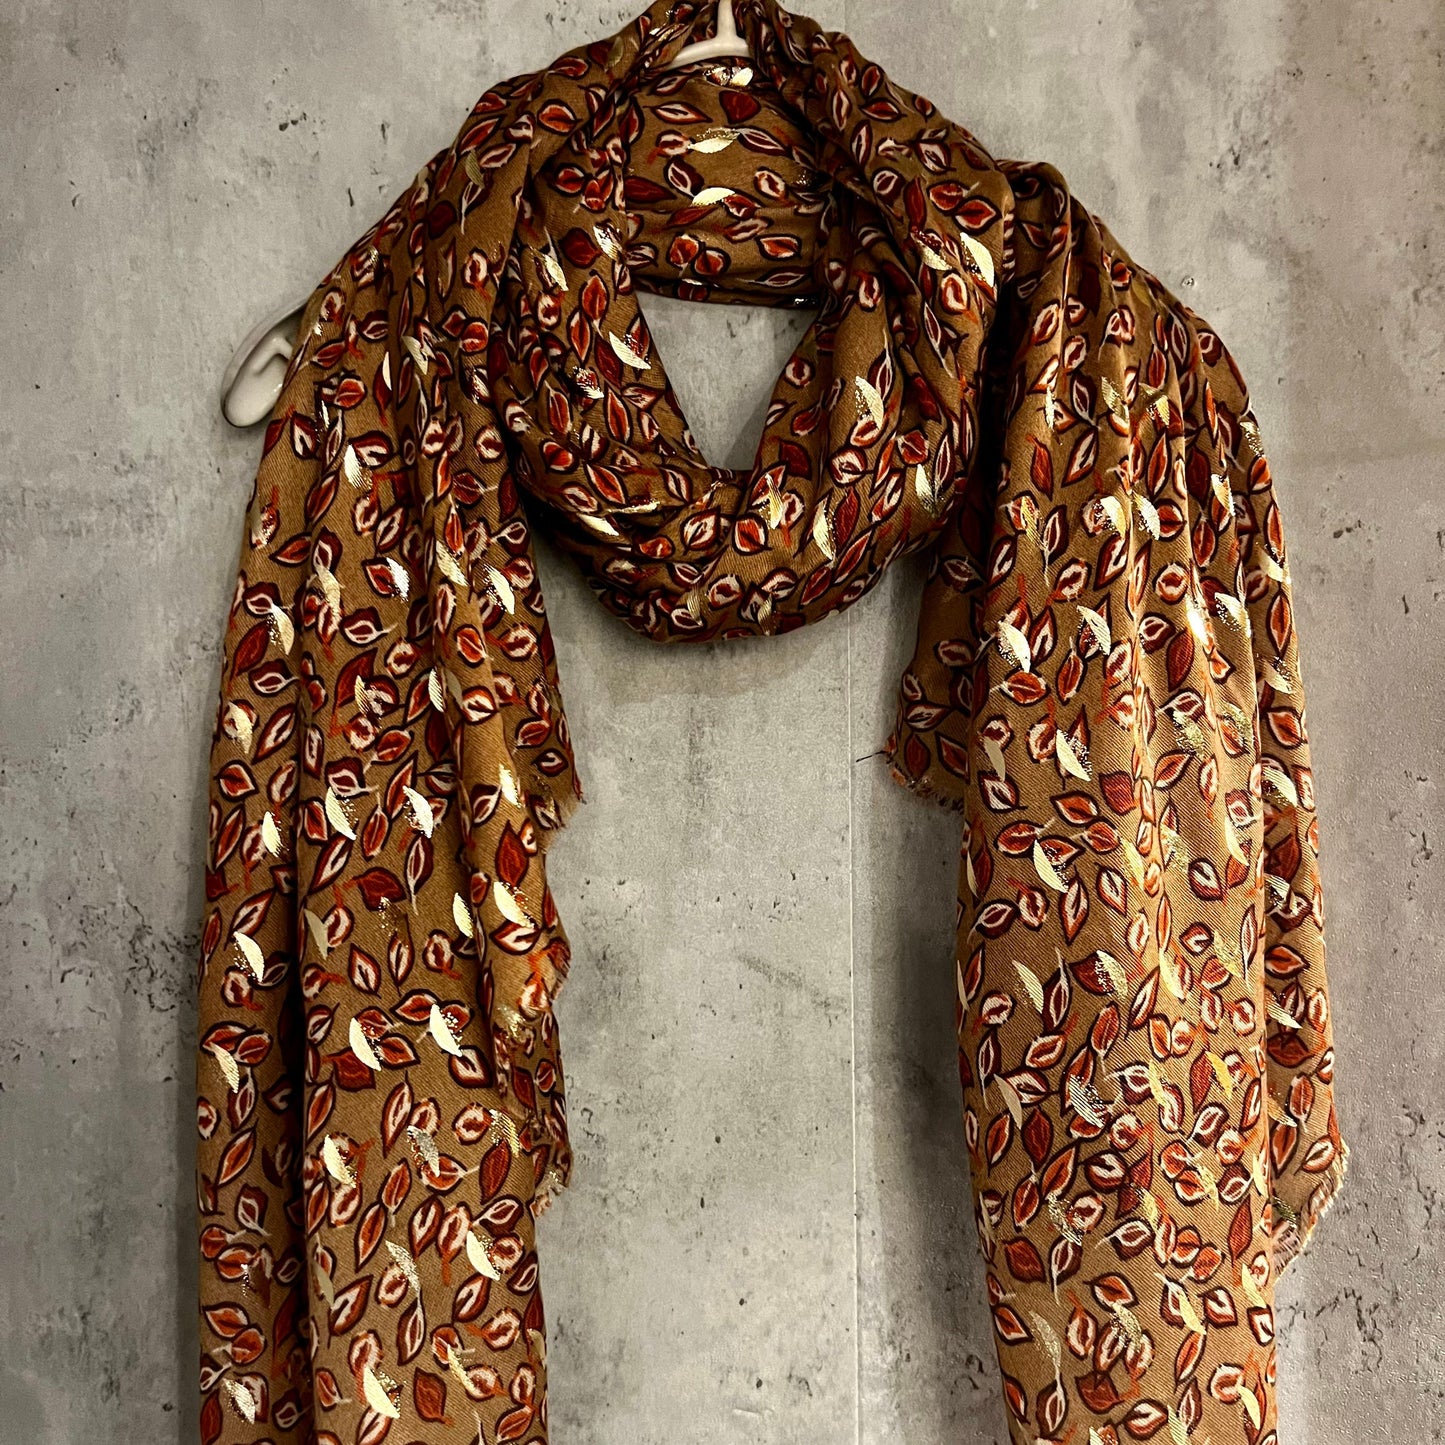 Seamless Small leaf’s With Gold Foil Brown Cotton Scarf/Summer Autumn Winter Scarf/Gifts For Mum/Gifts For Her Birthday Christmas/UK Seller